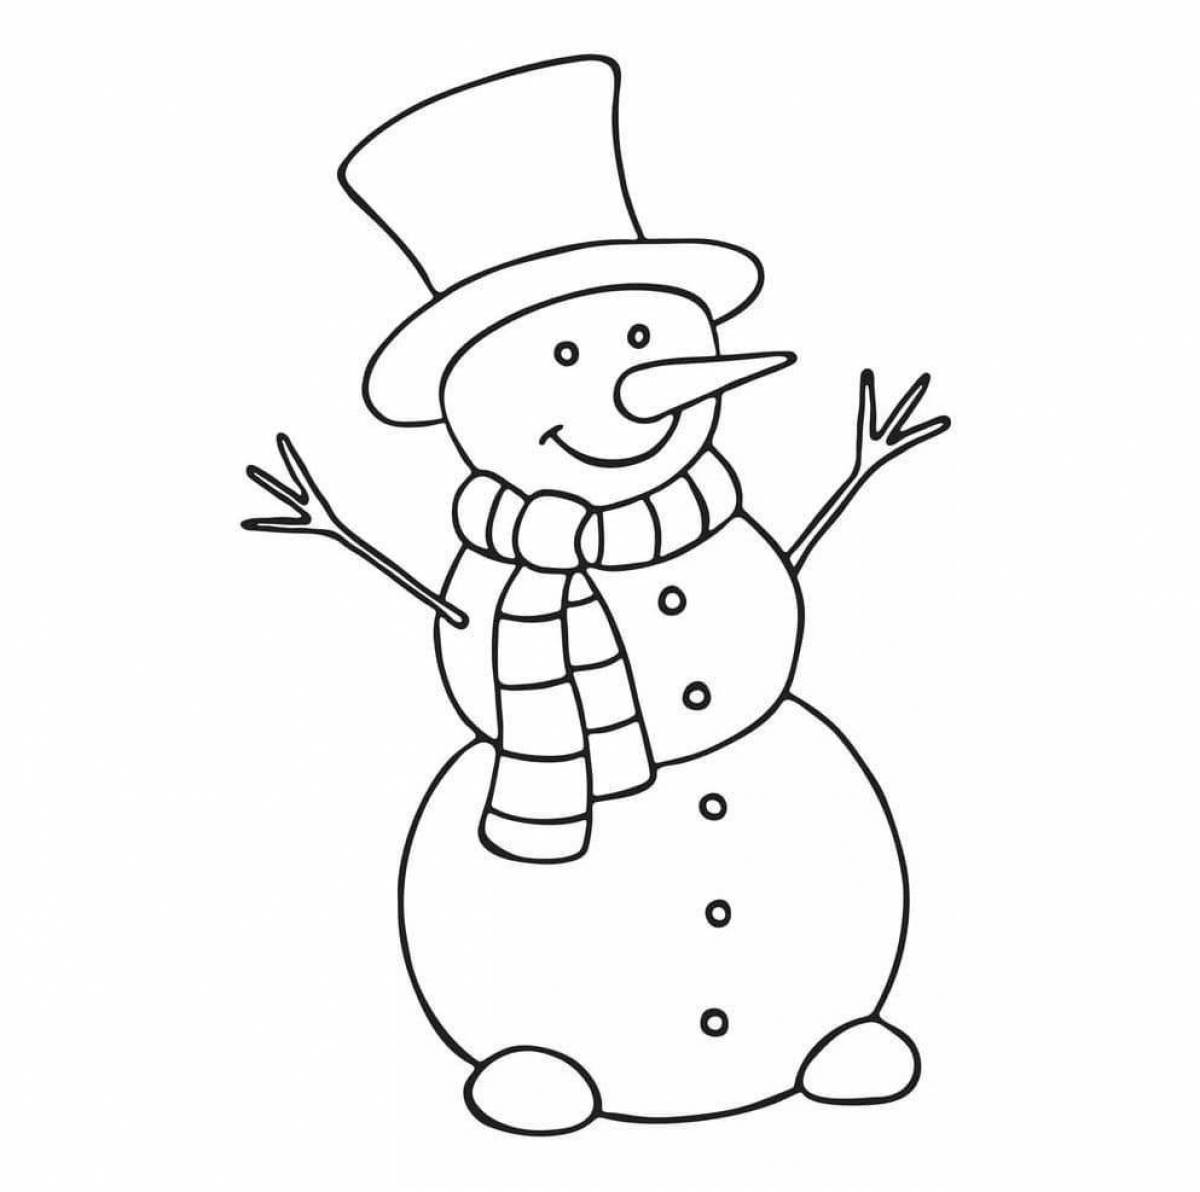 A fun snowman coloring book for kids 5 6